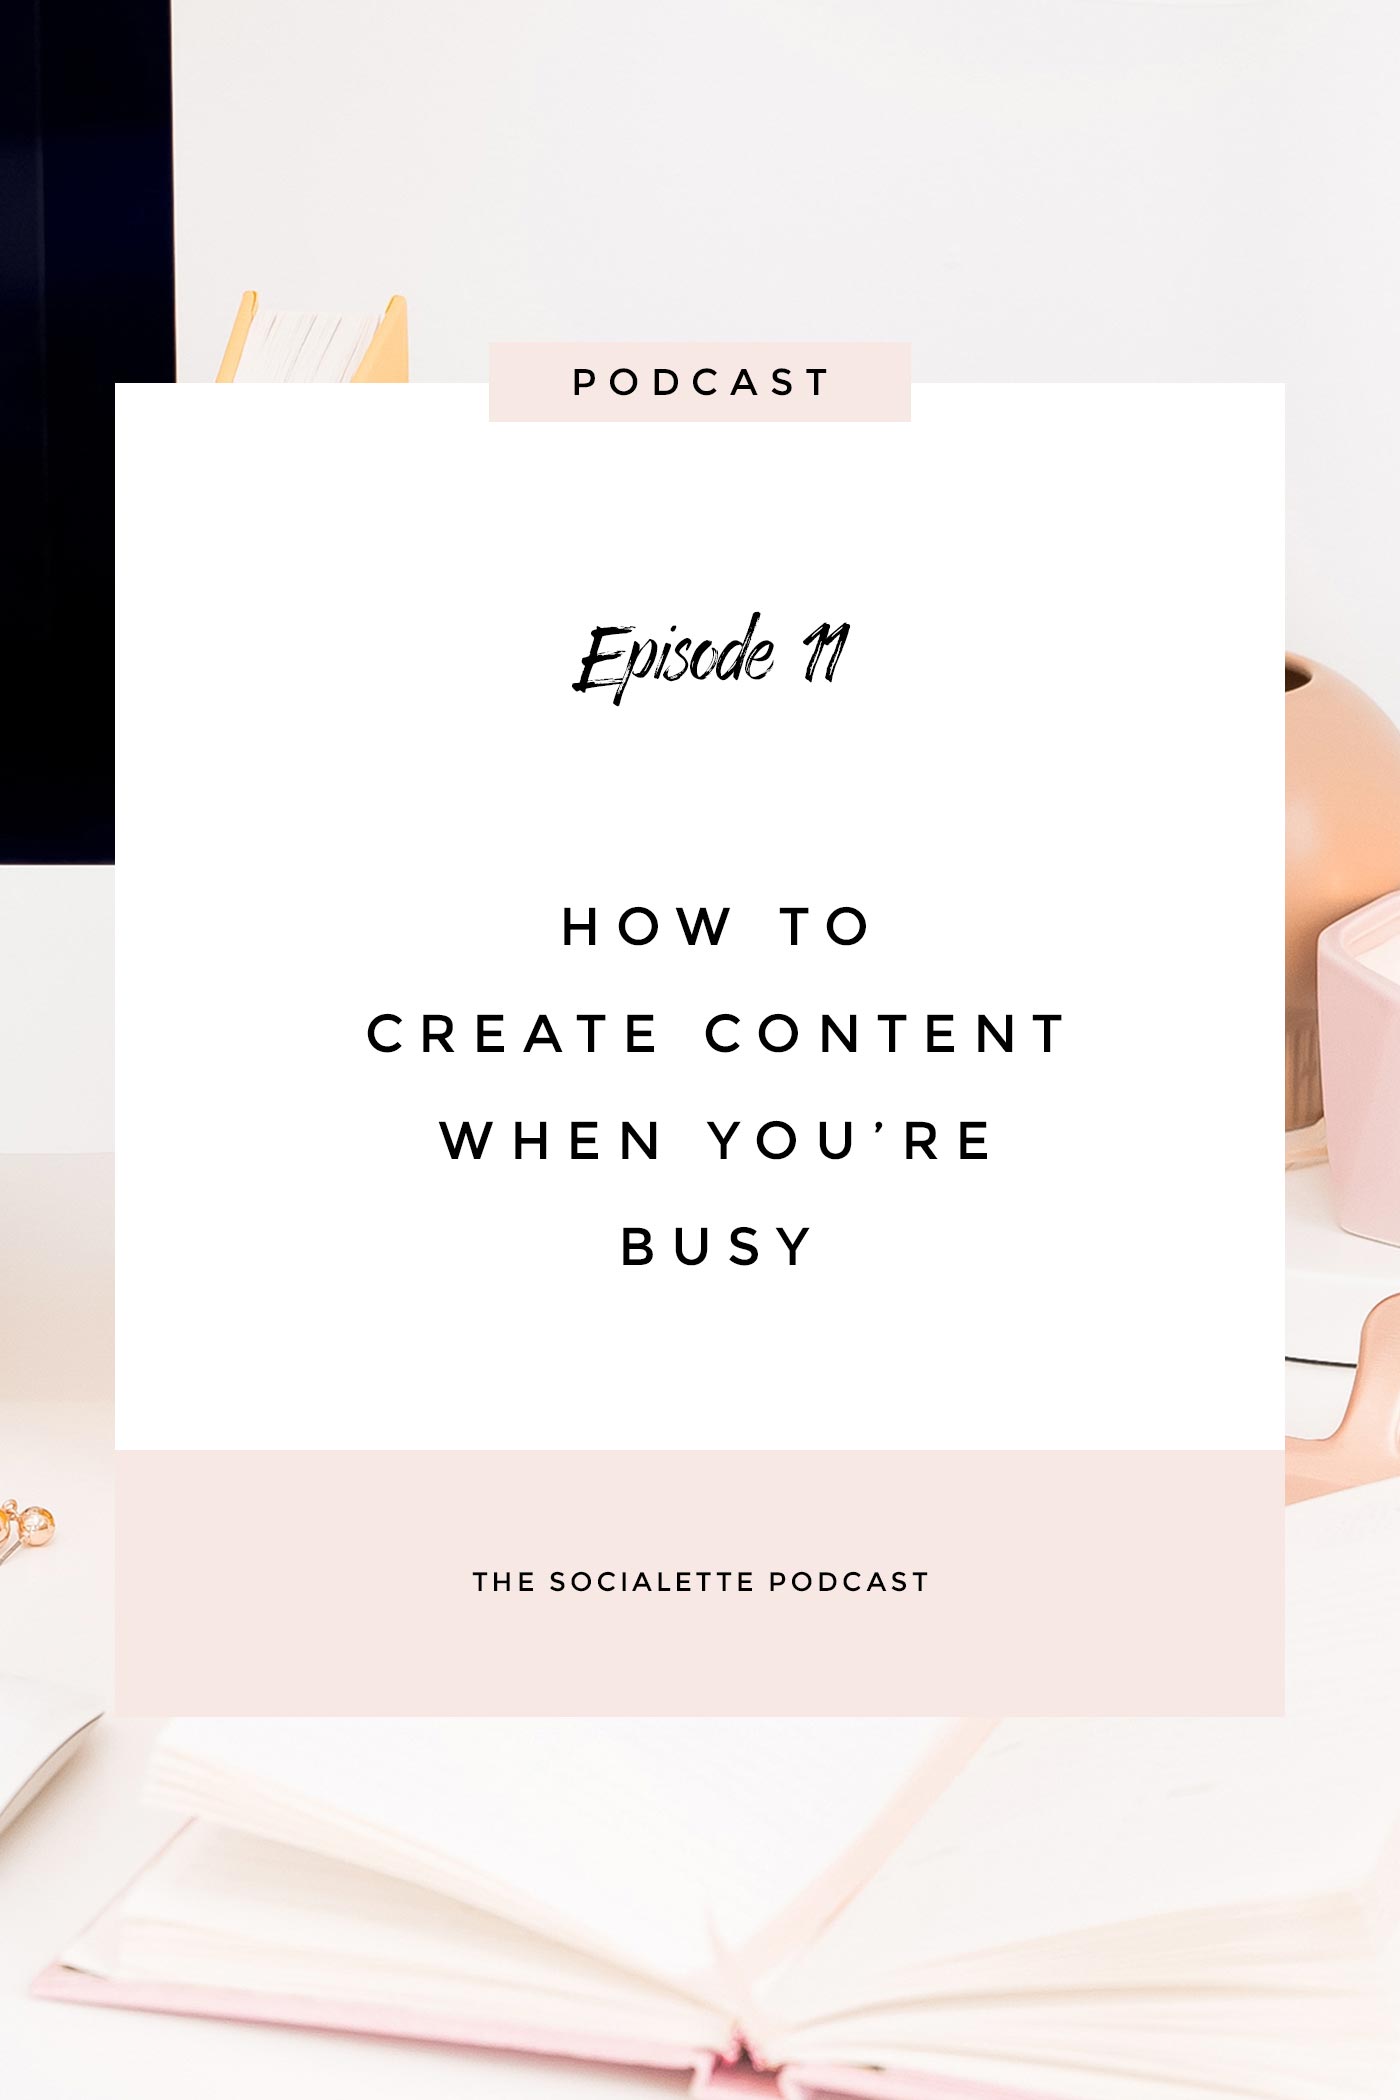 How to create content when you're busy